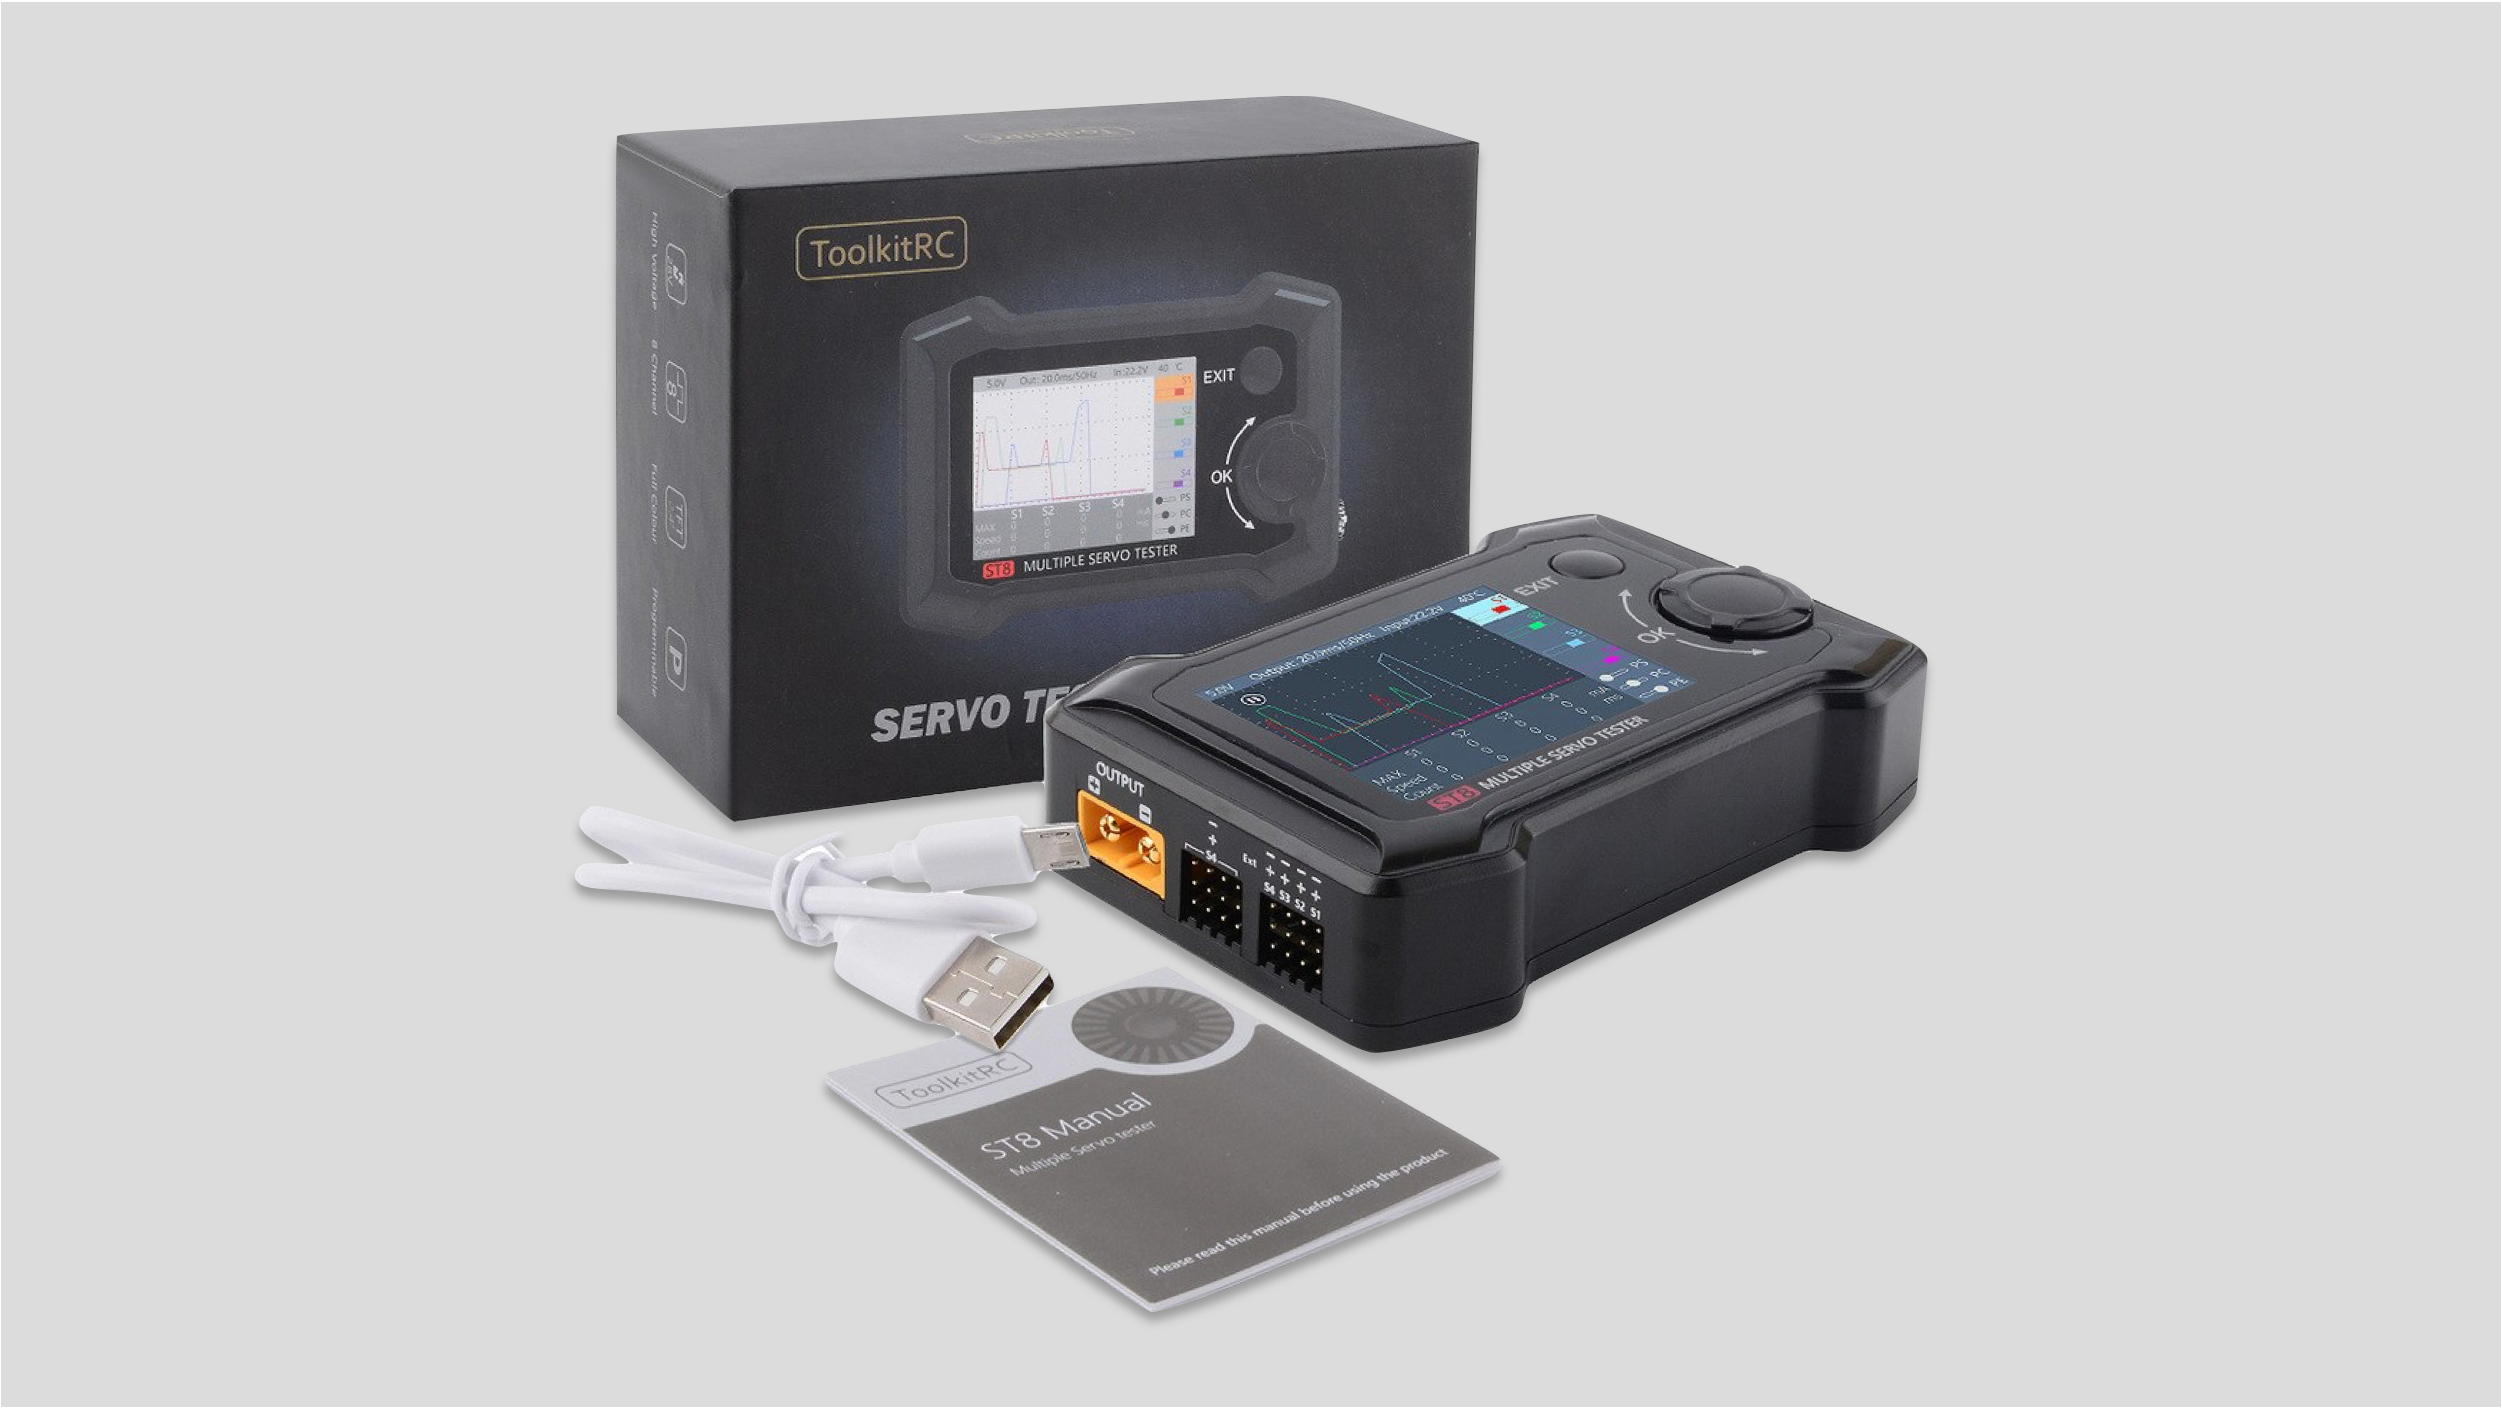 ToolkitRC ST8 Servo Tester. A useful and reasonably priced piece